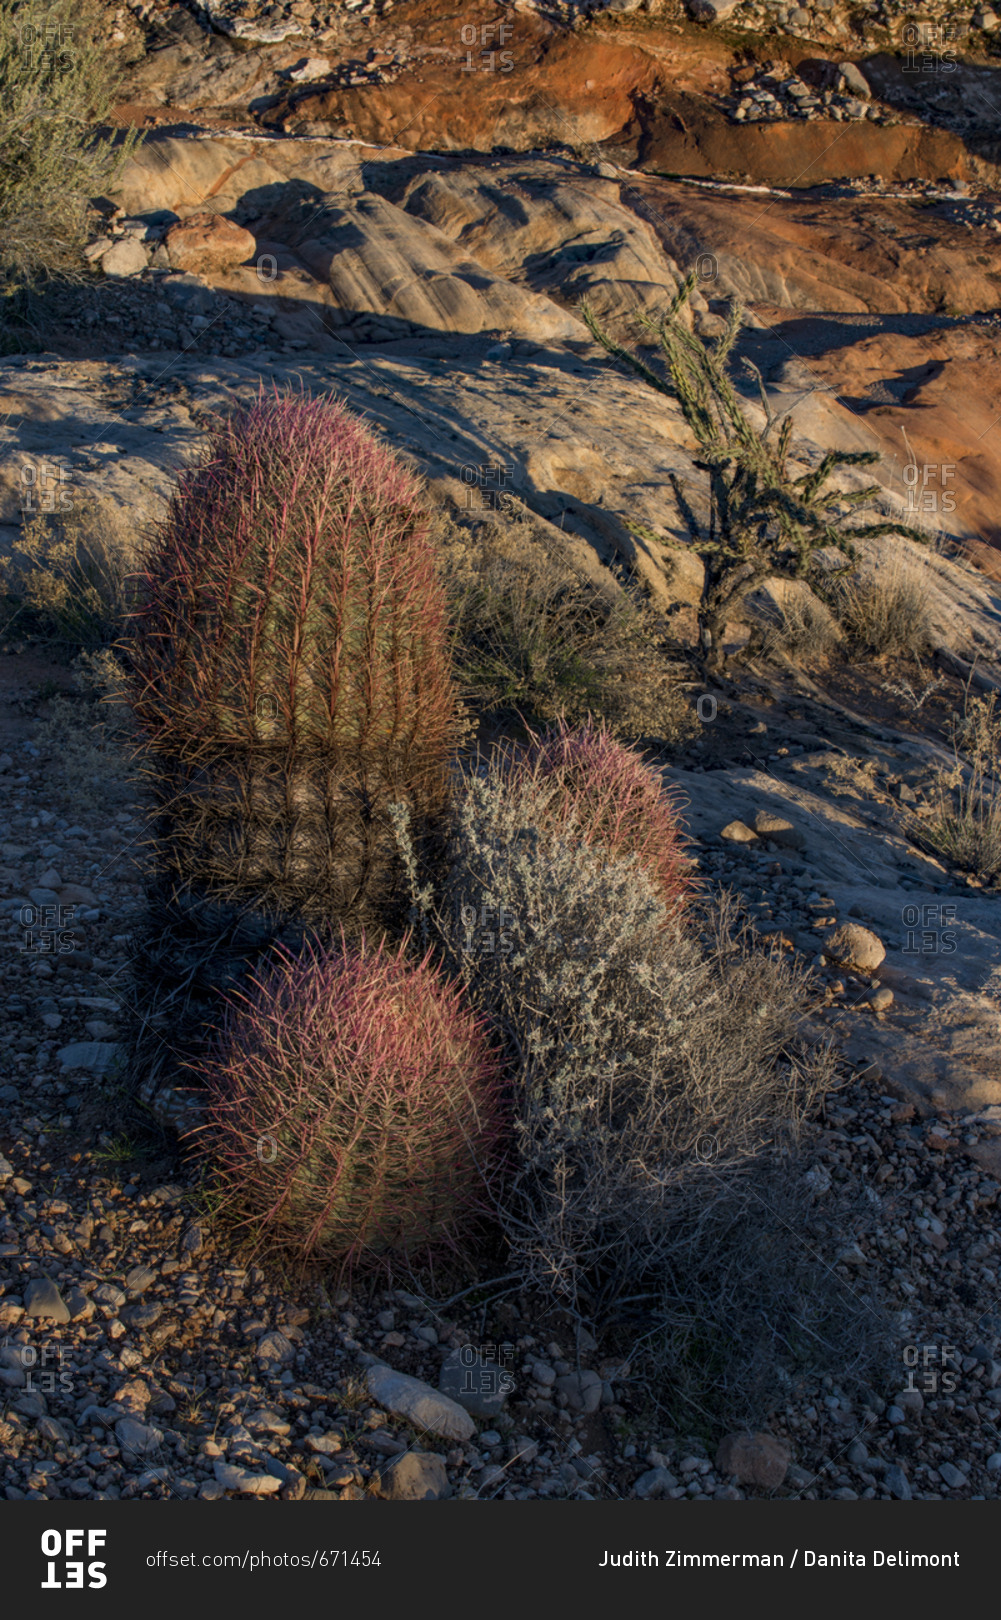 USA, Nevada, Barrel Cactus and other desert vegetation at Whitney Pockets, Gold Butte National Monument